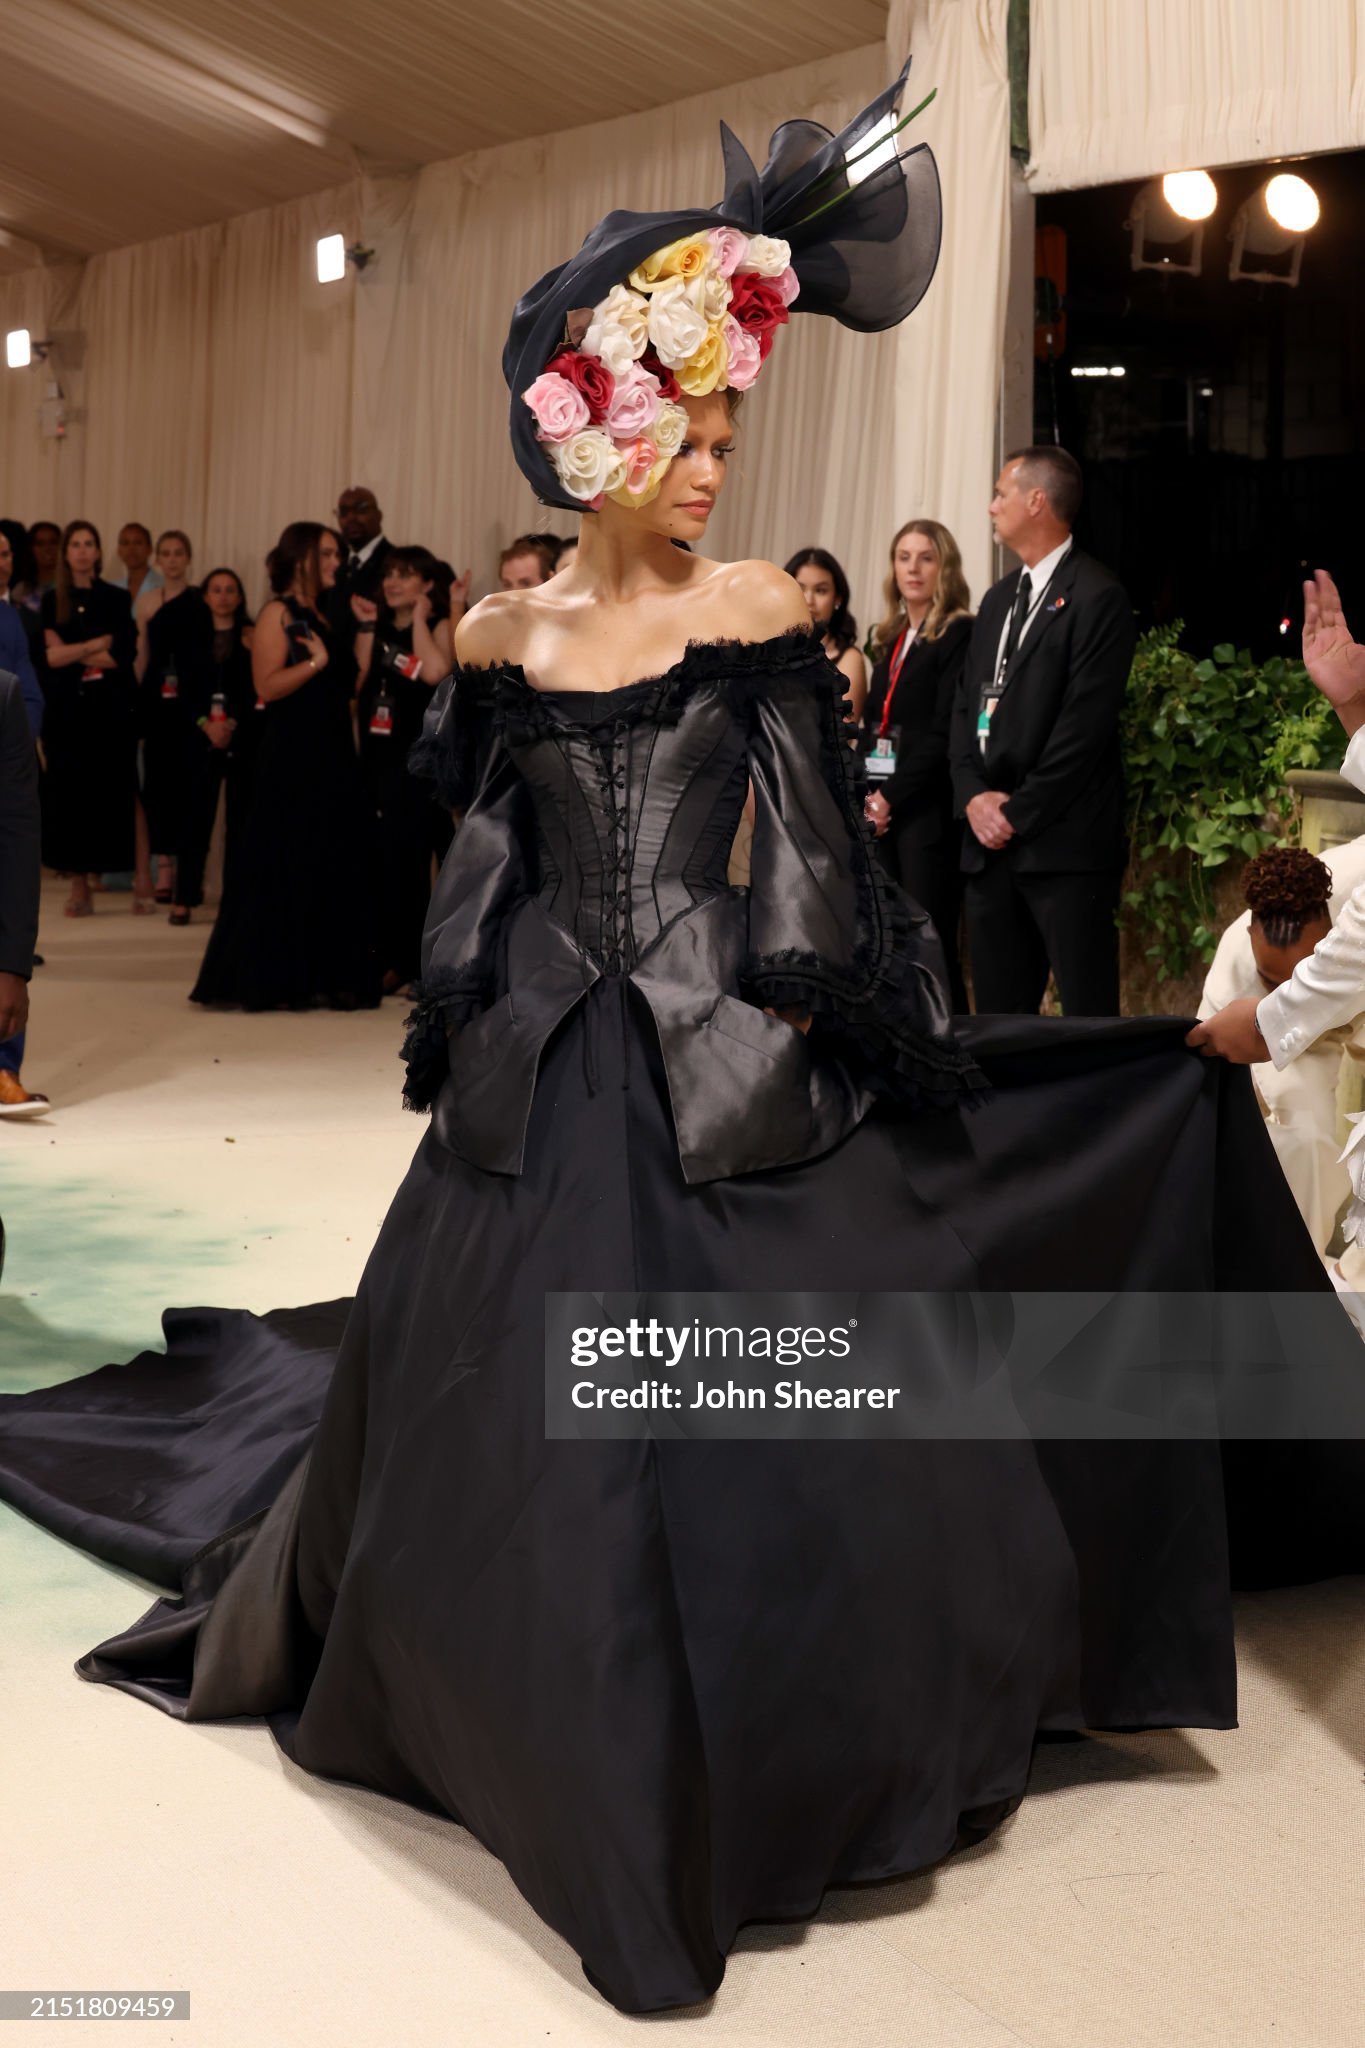 gettyimages-2151809459-2048x2048.jpg